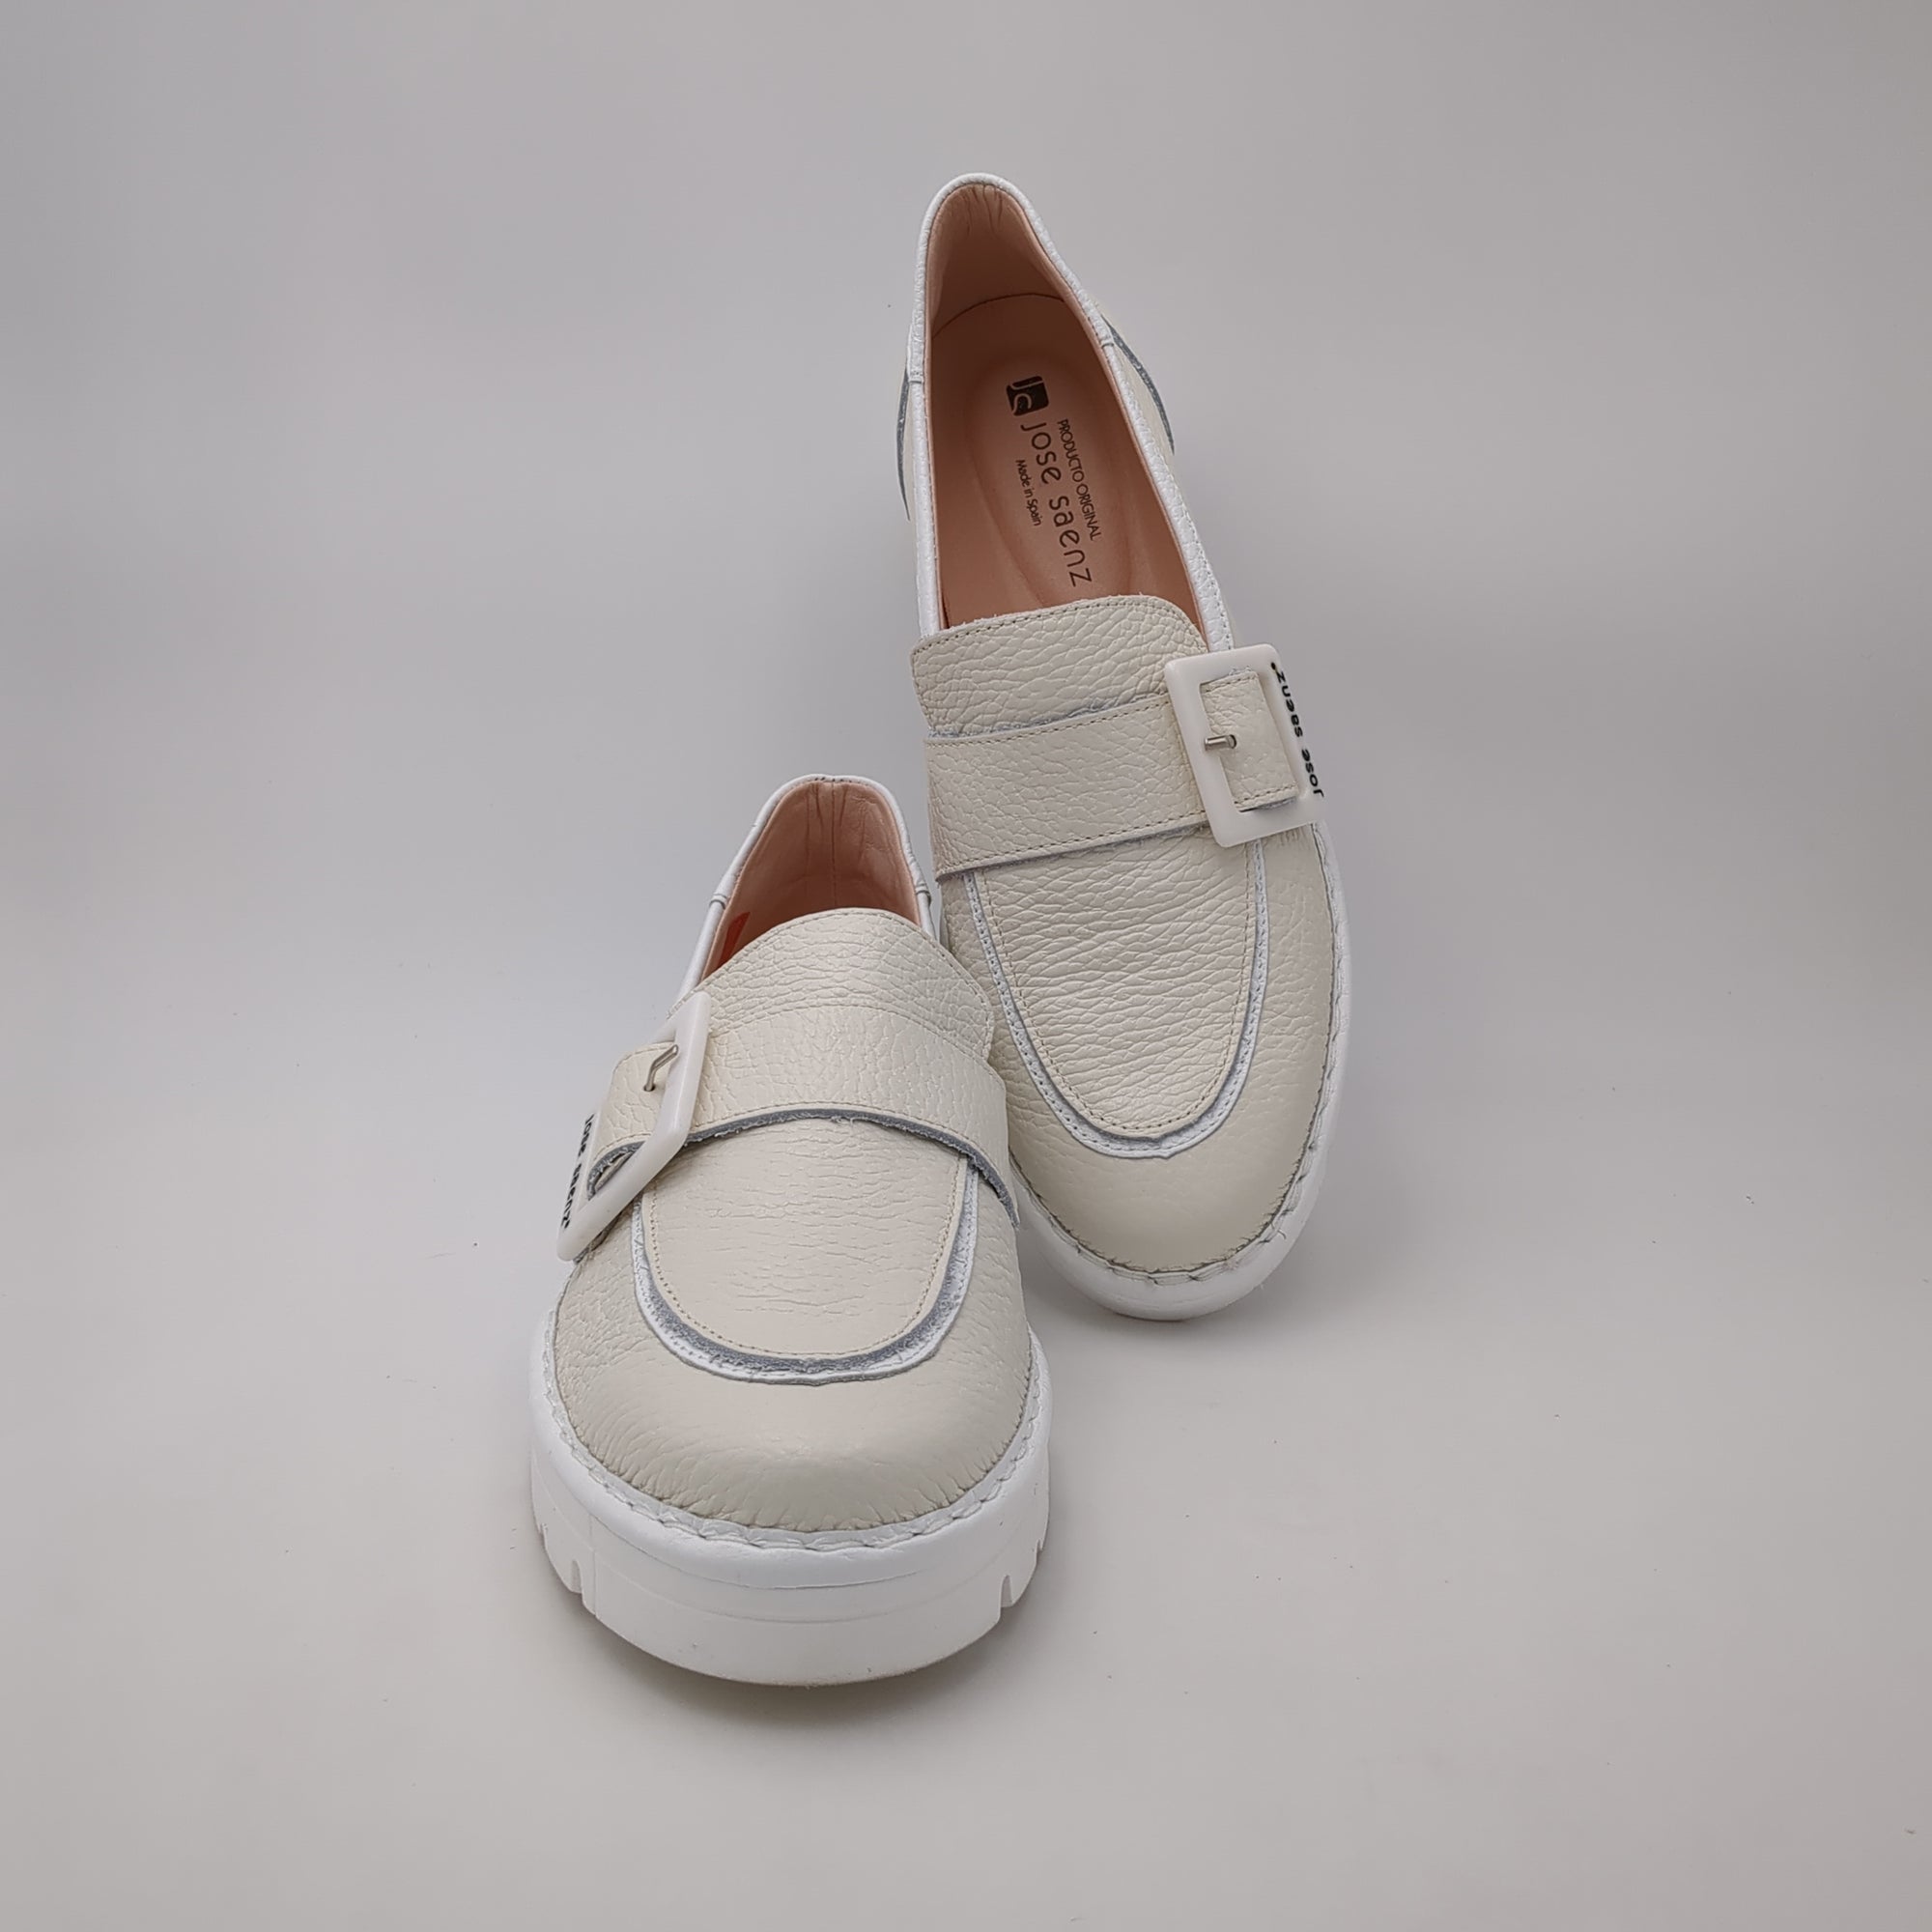 Jose Saenz Cream Leather Loafers with Sporty Sole - Women's Luxury Footwear